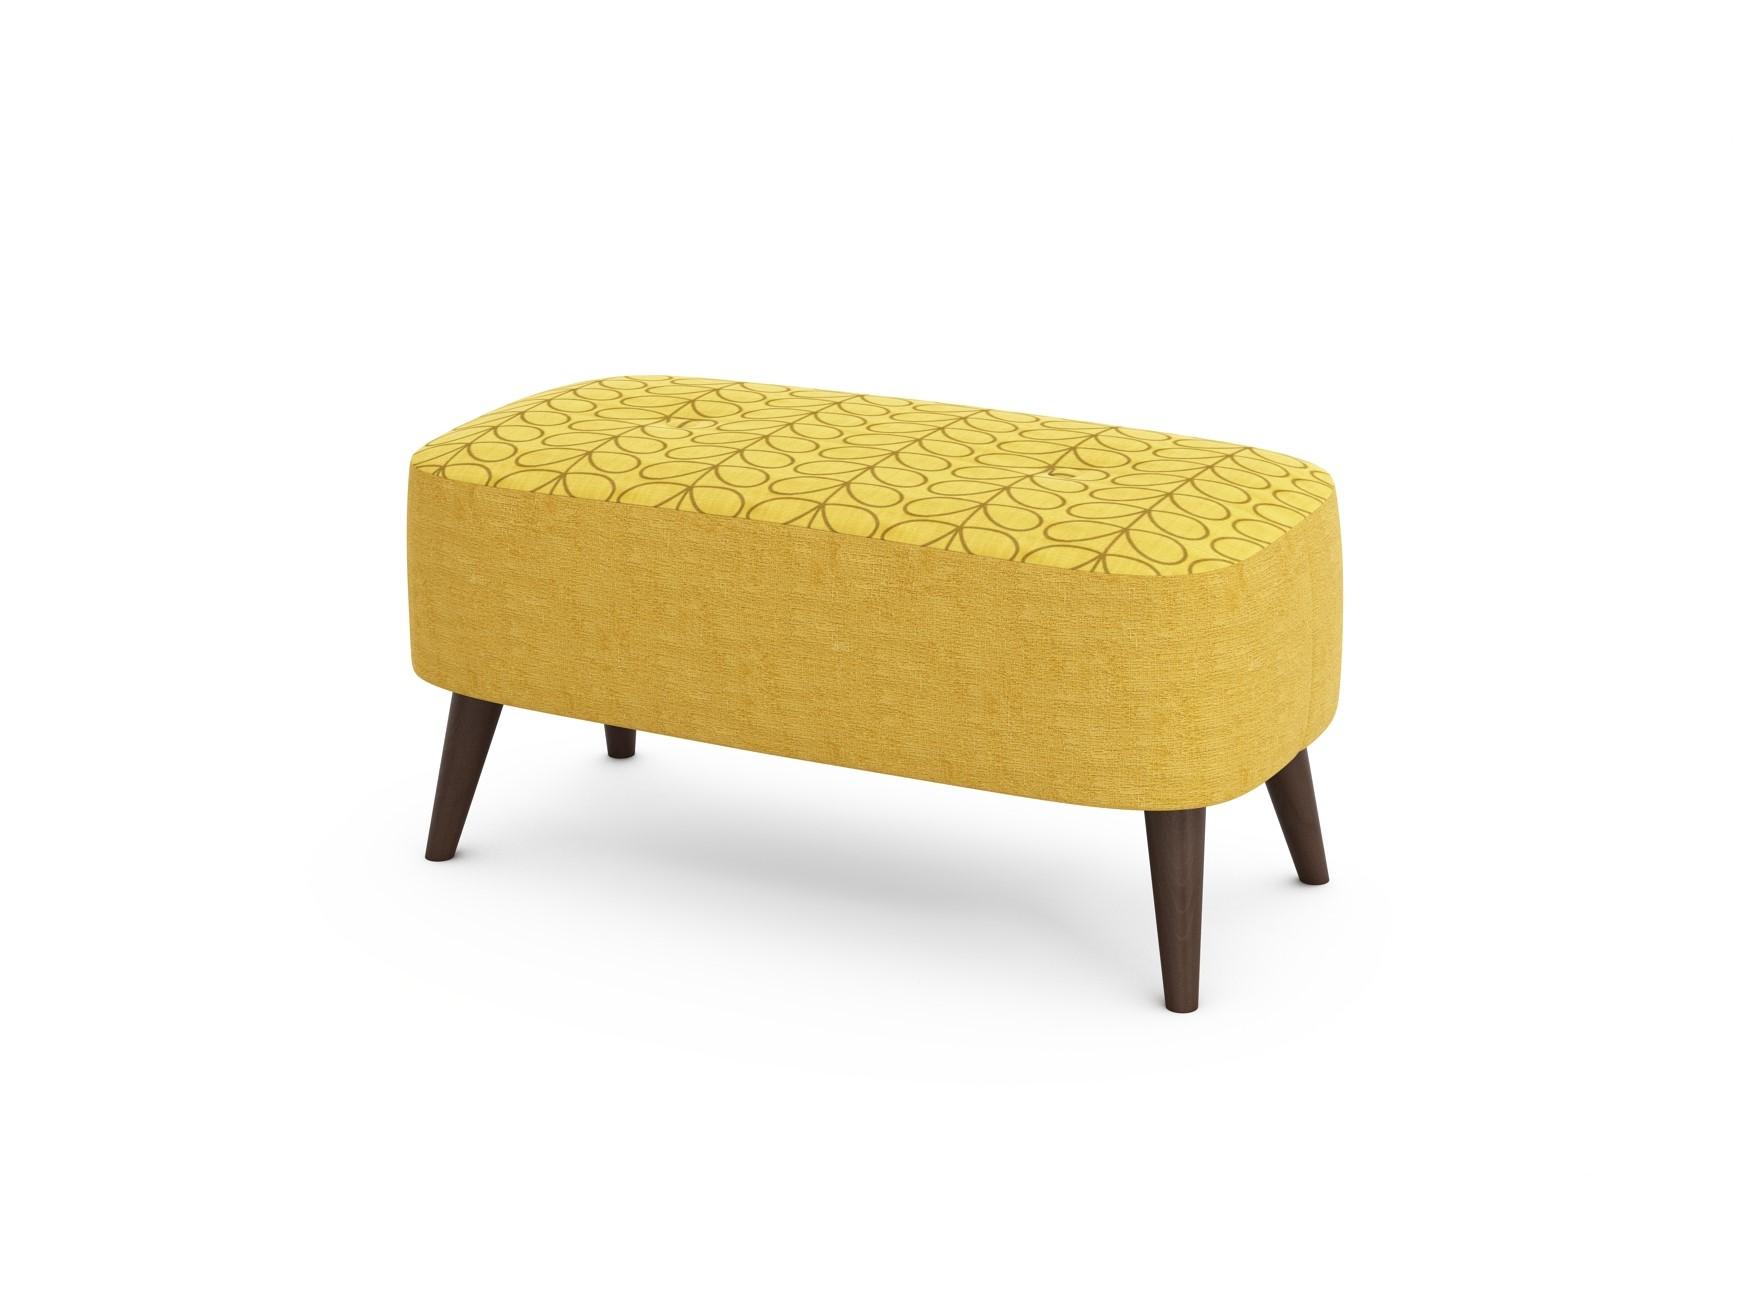 Donegal Small Print Stool